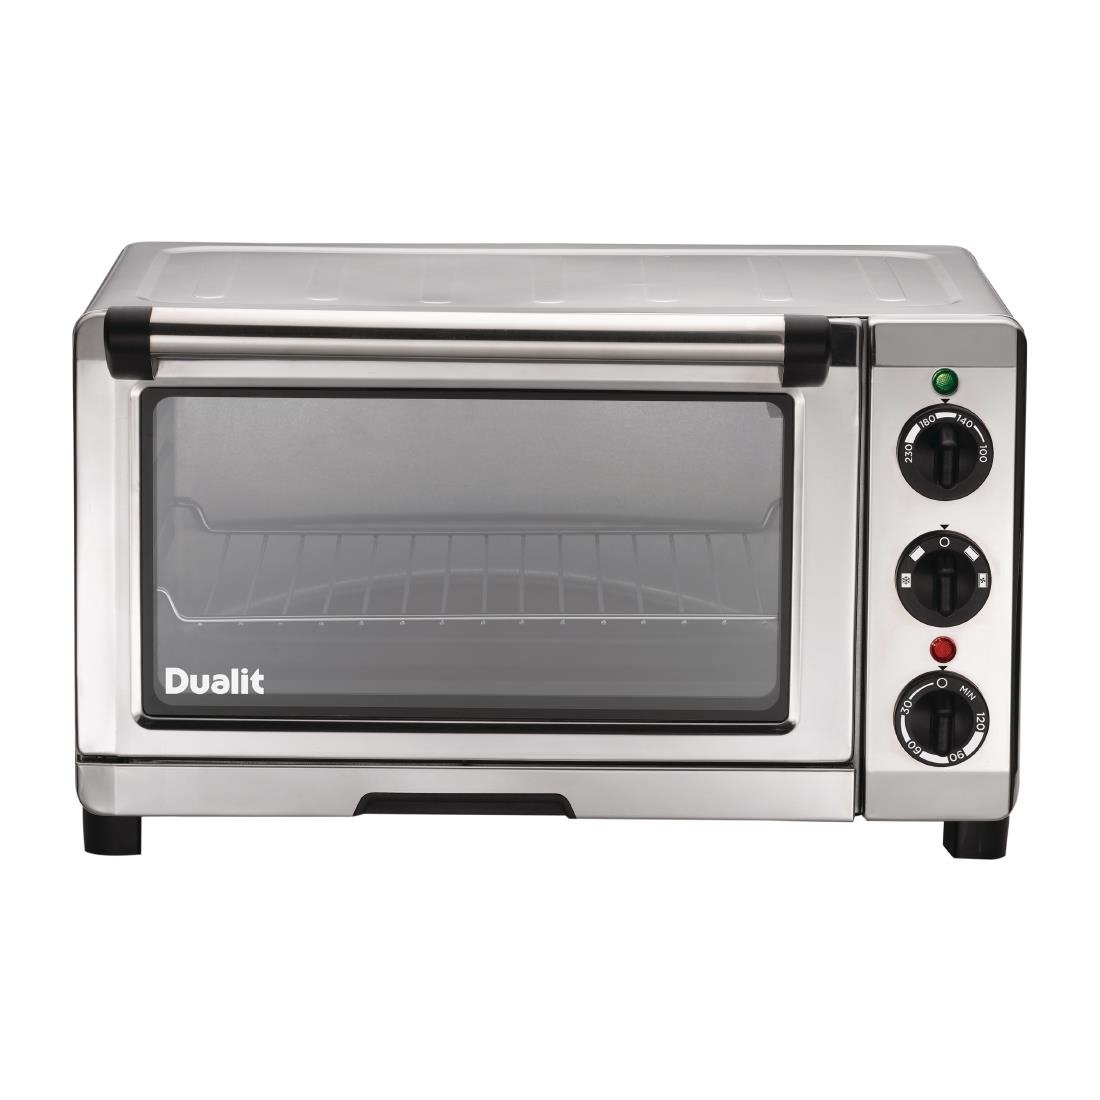 Dualit Mini Electric Convection Oven 89200 Next working day UK Delivery 